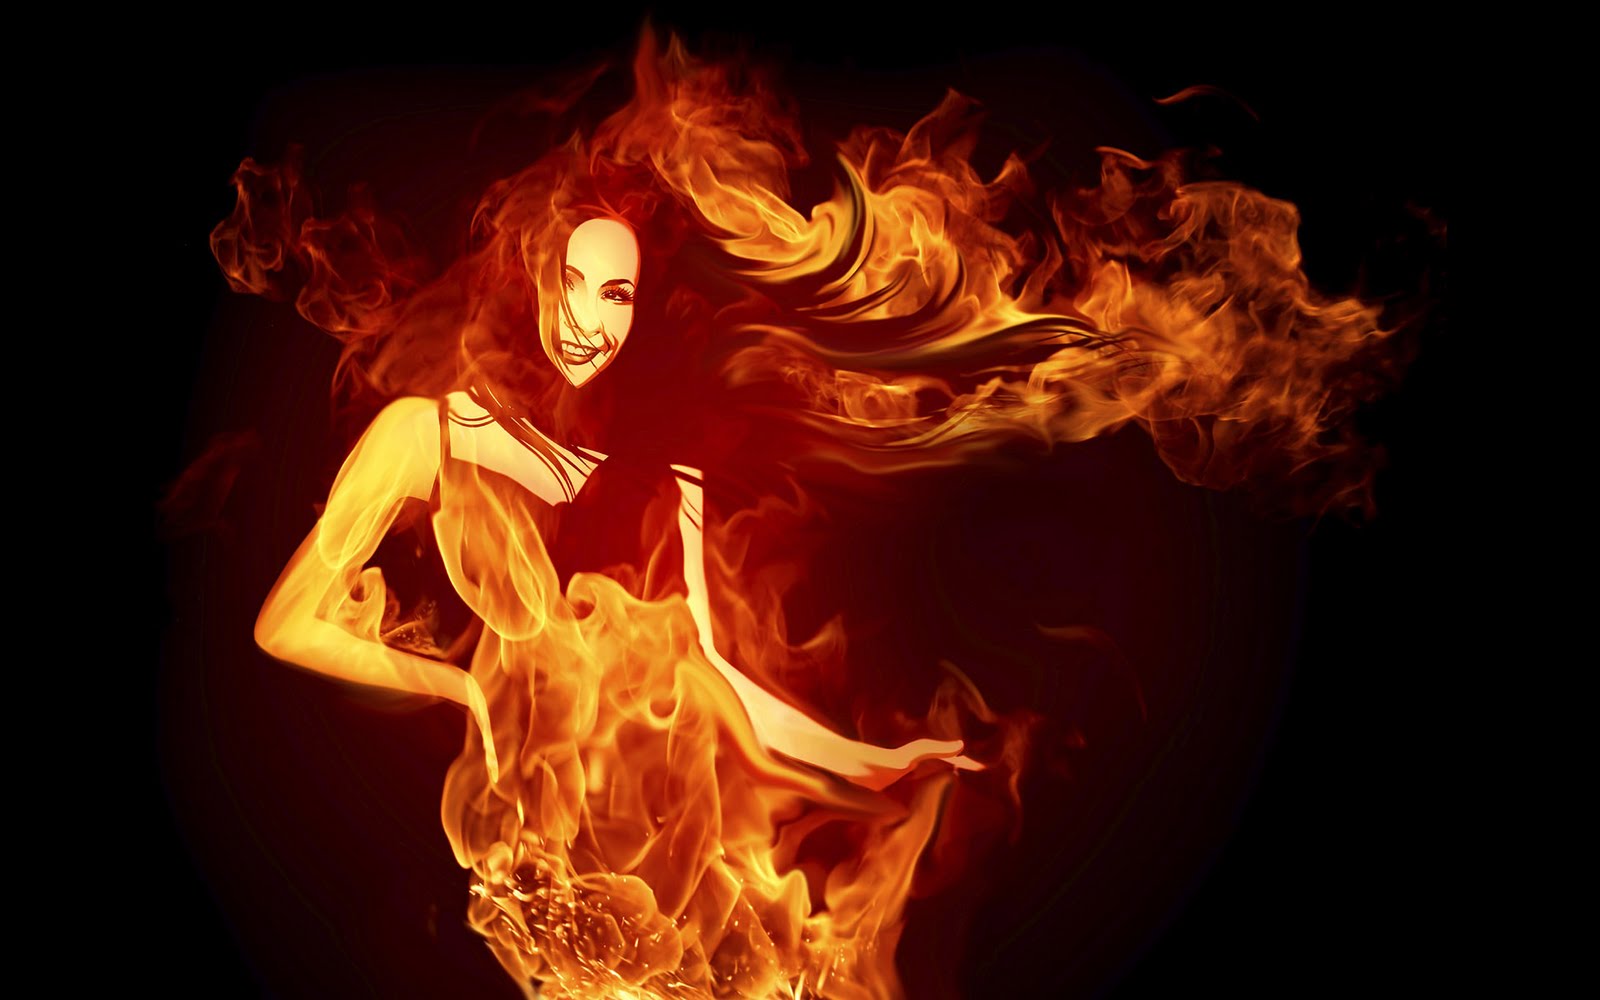 Wallpapers Guitar Woman Dark Hd With A Made Of Fire 1600x1000 ...